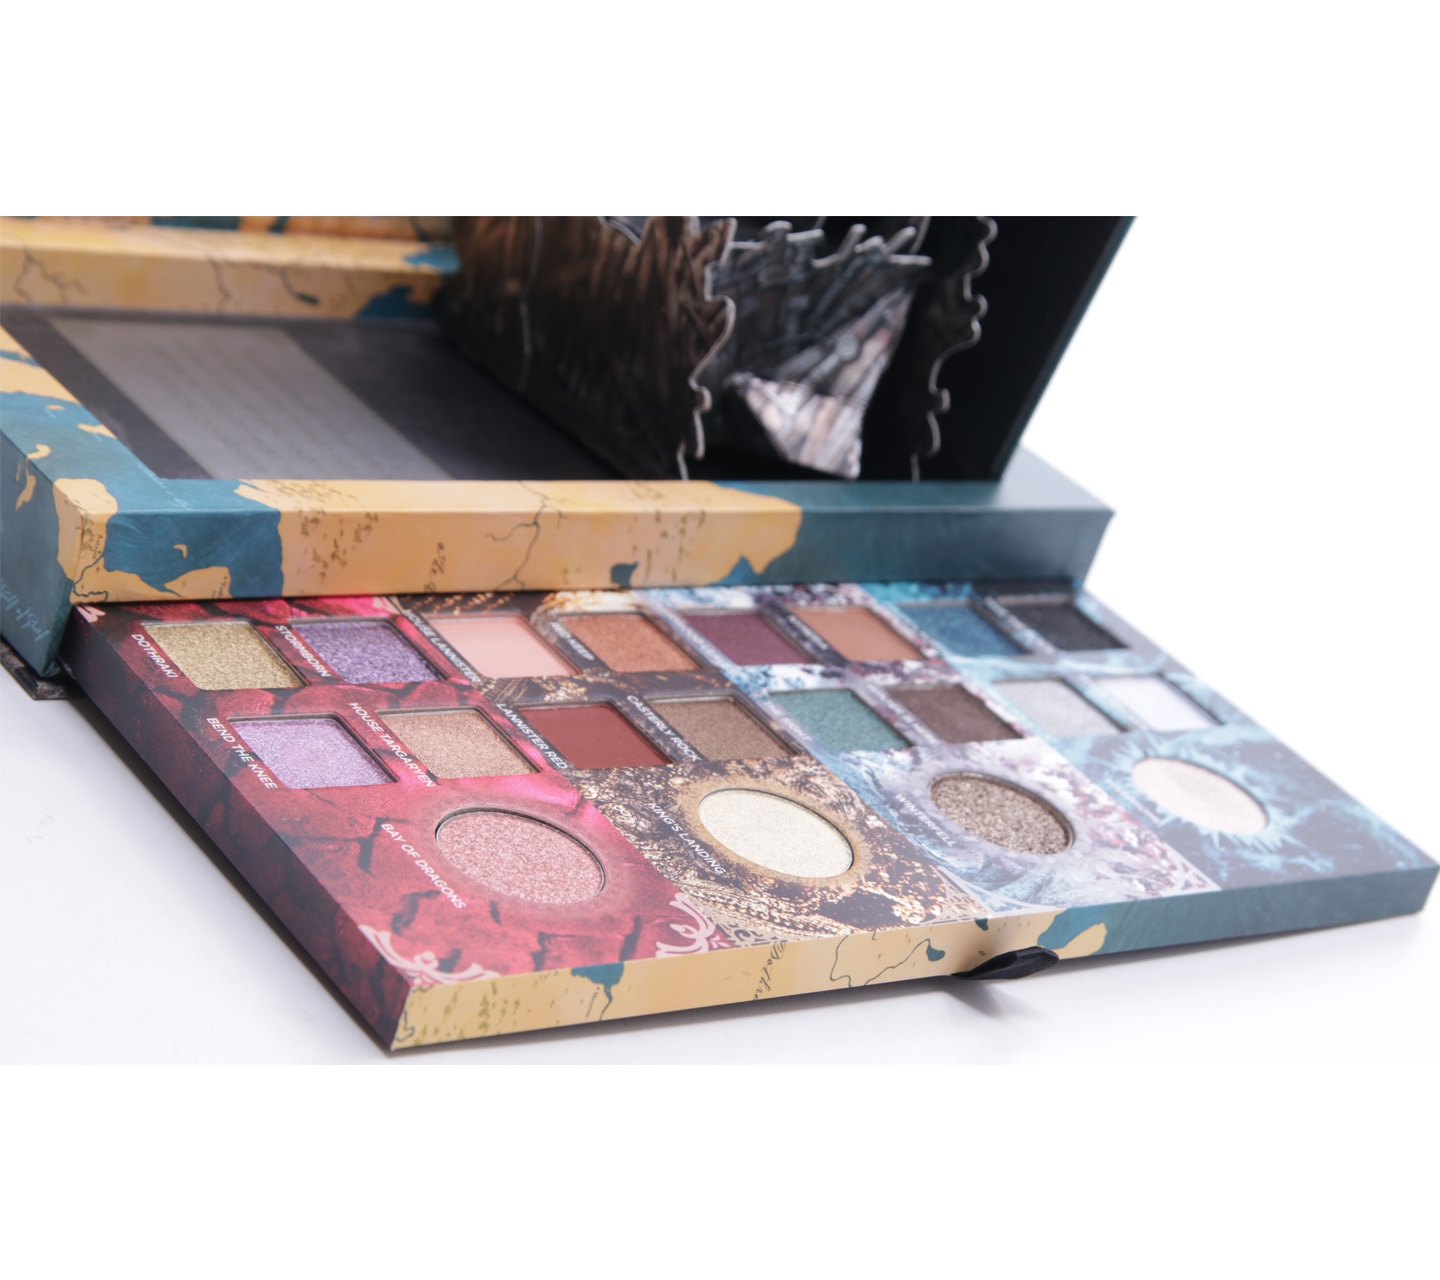 Urban Decay Game Of Thrones Eyeshadow Sets and Palette